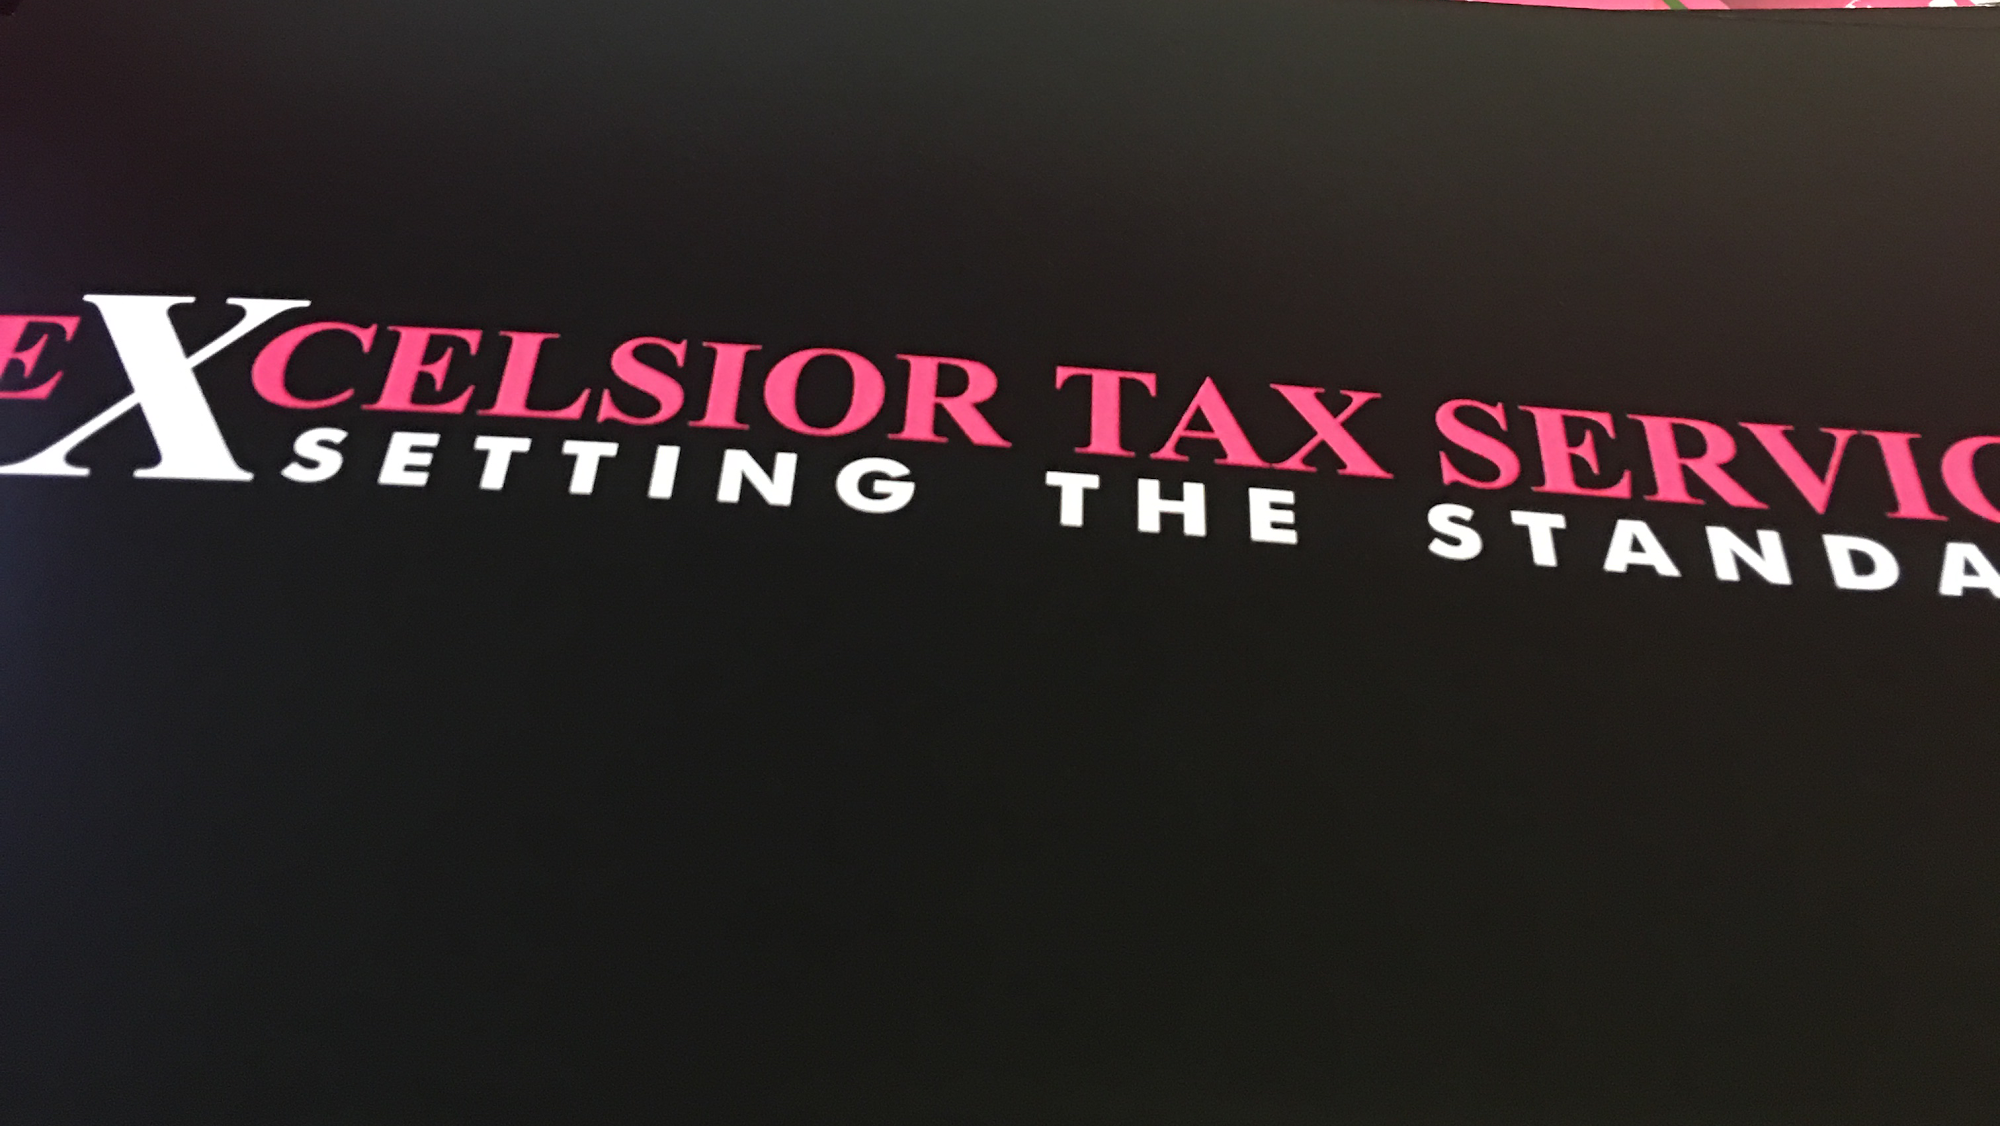 Excelsior Tax Service